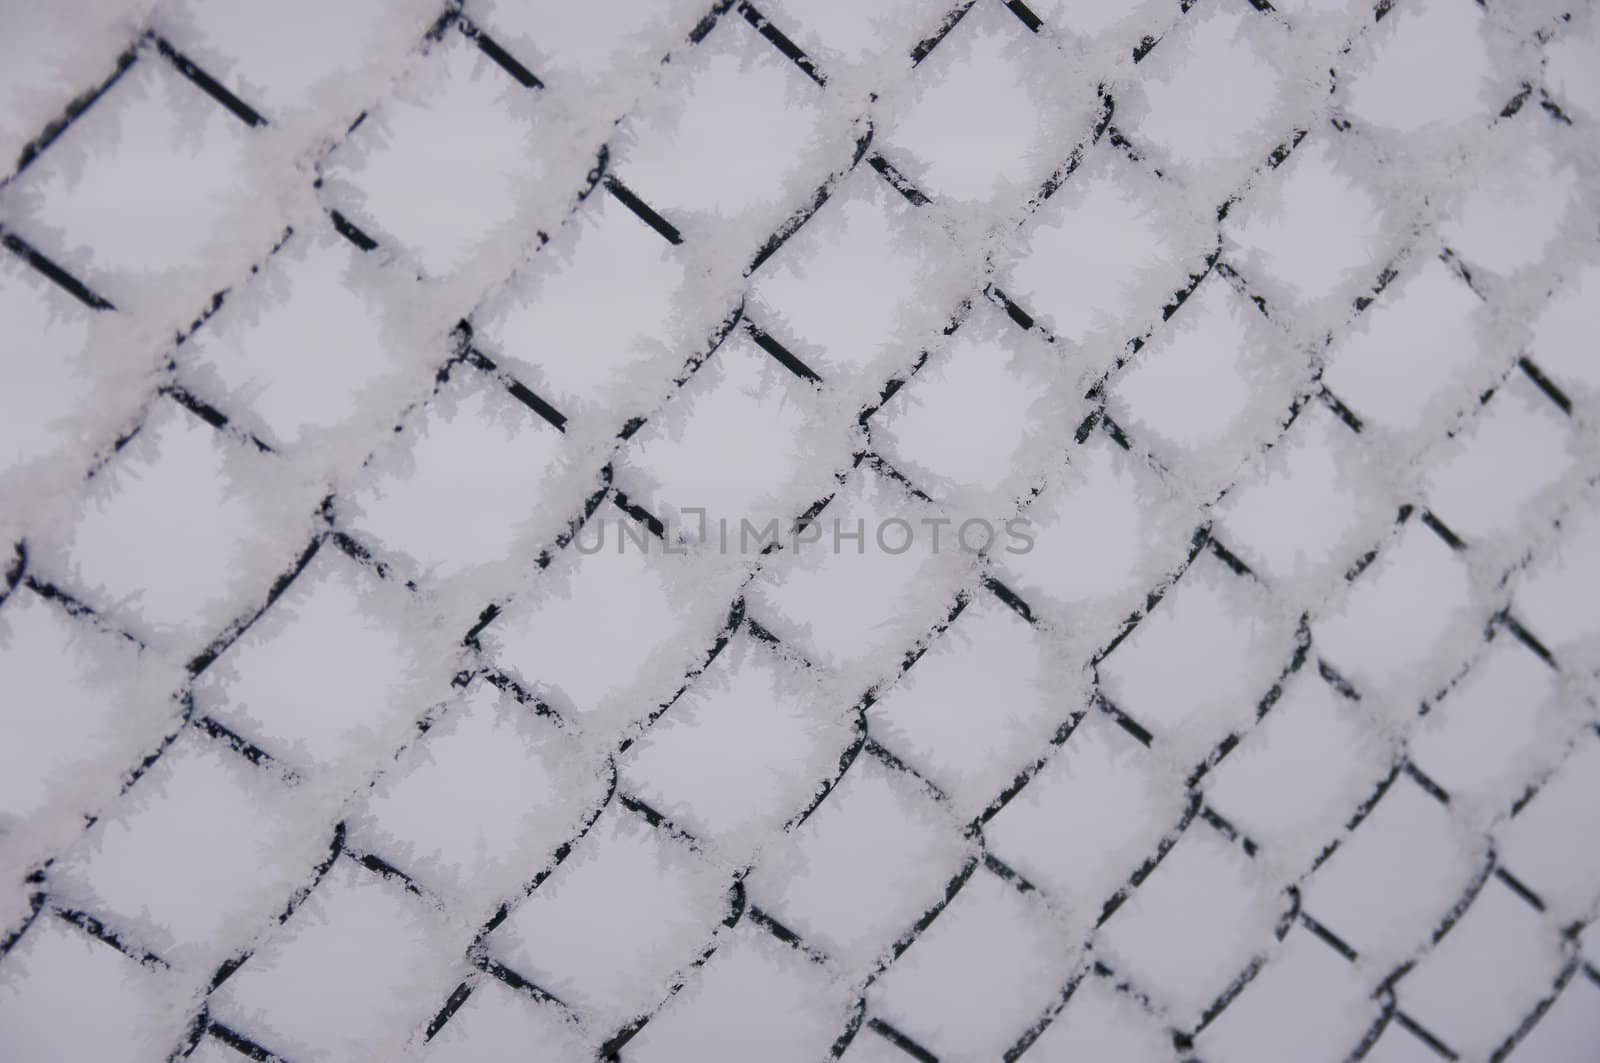 Snowy fence by peterboxy